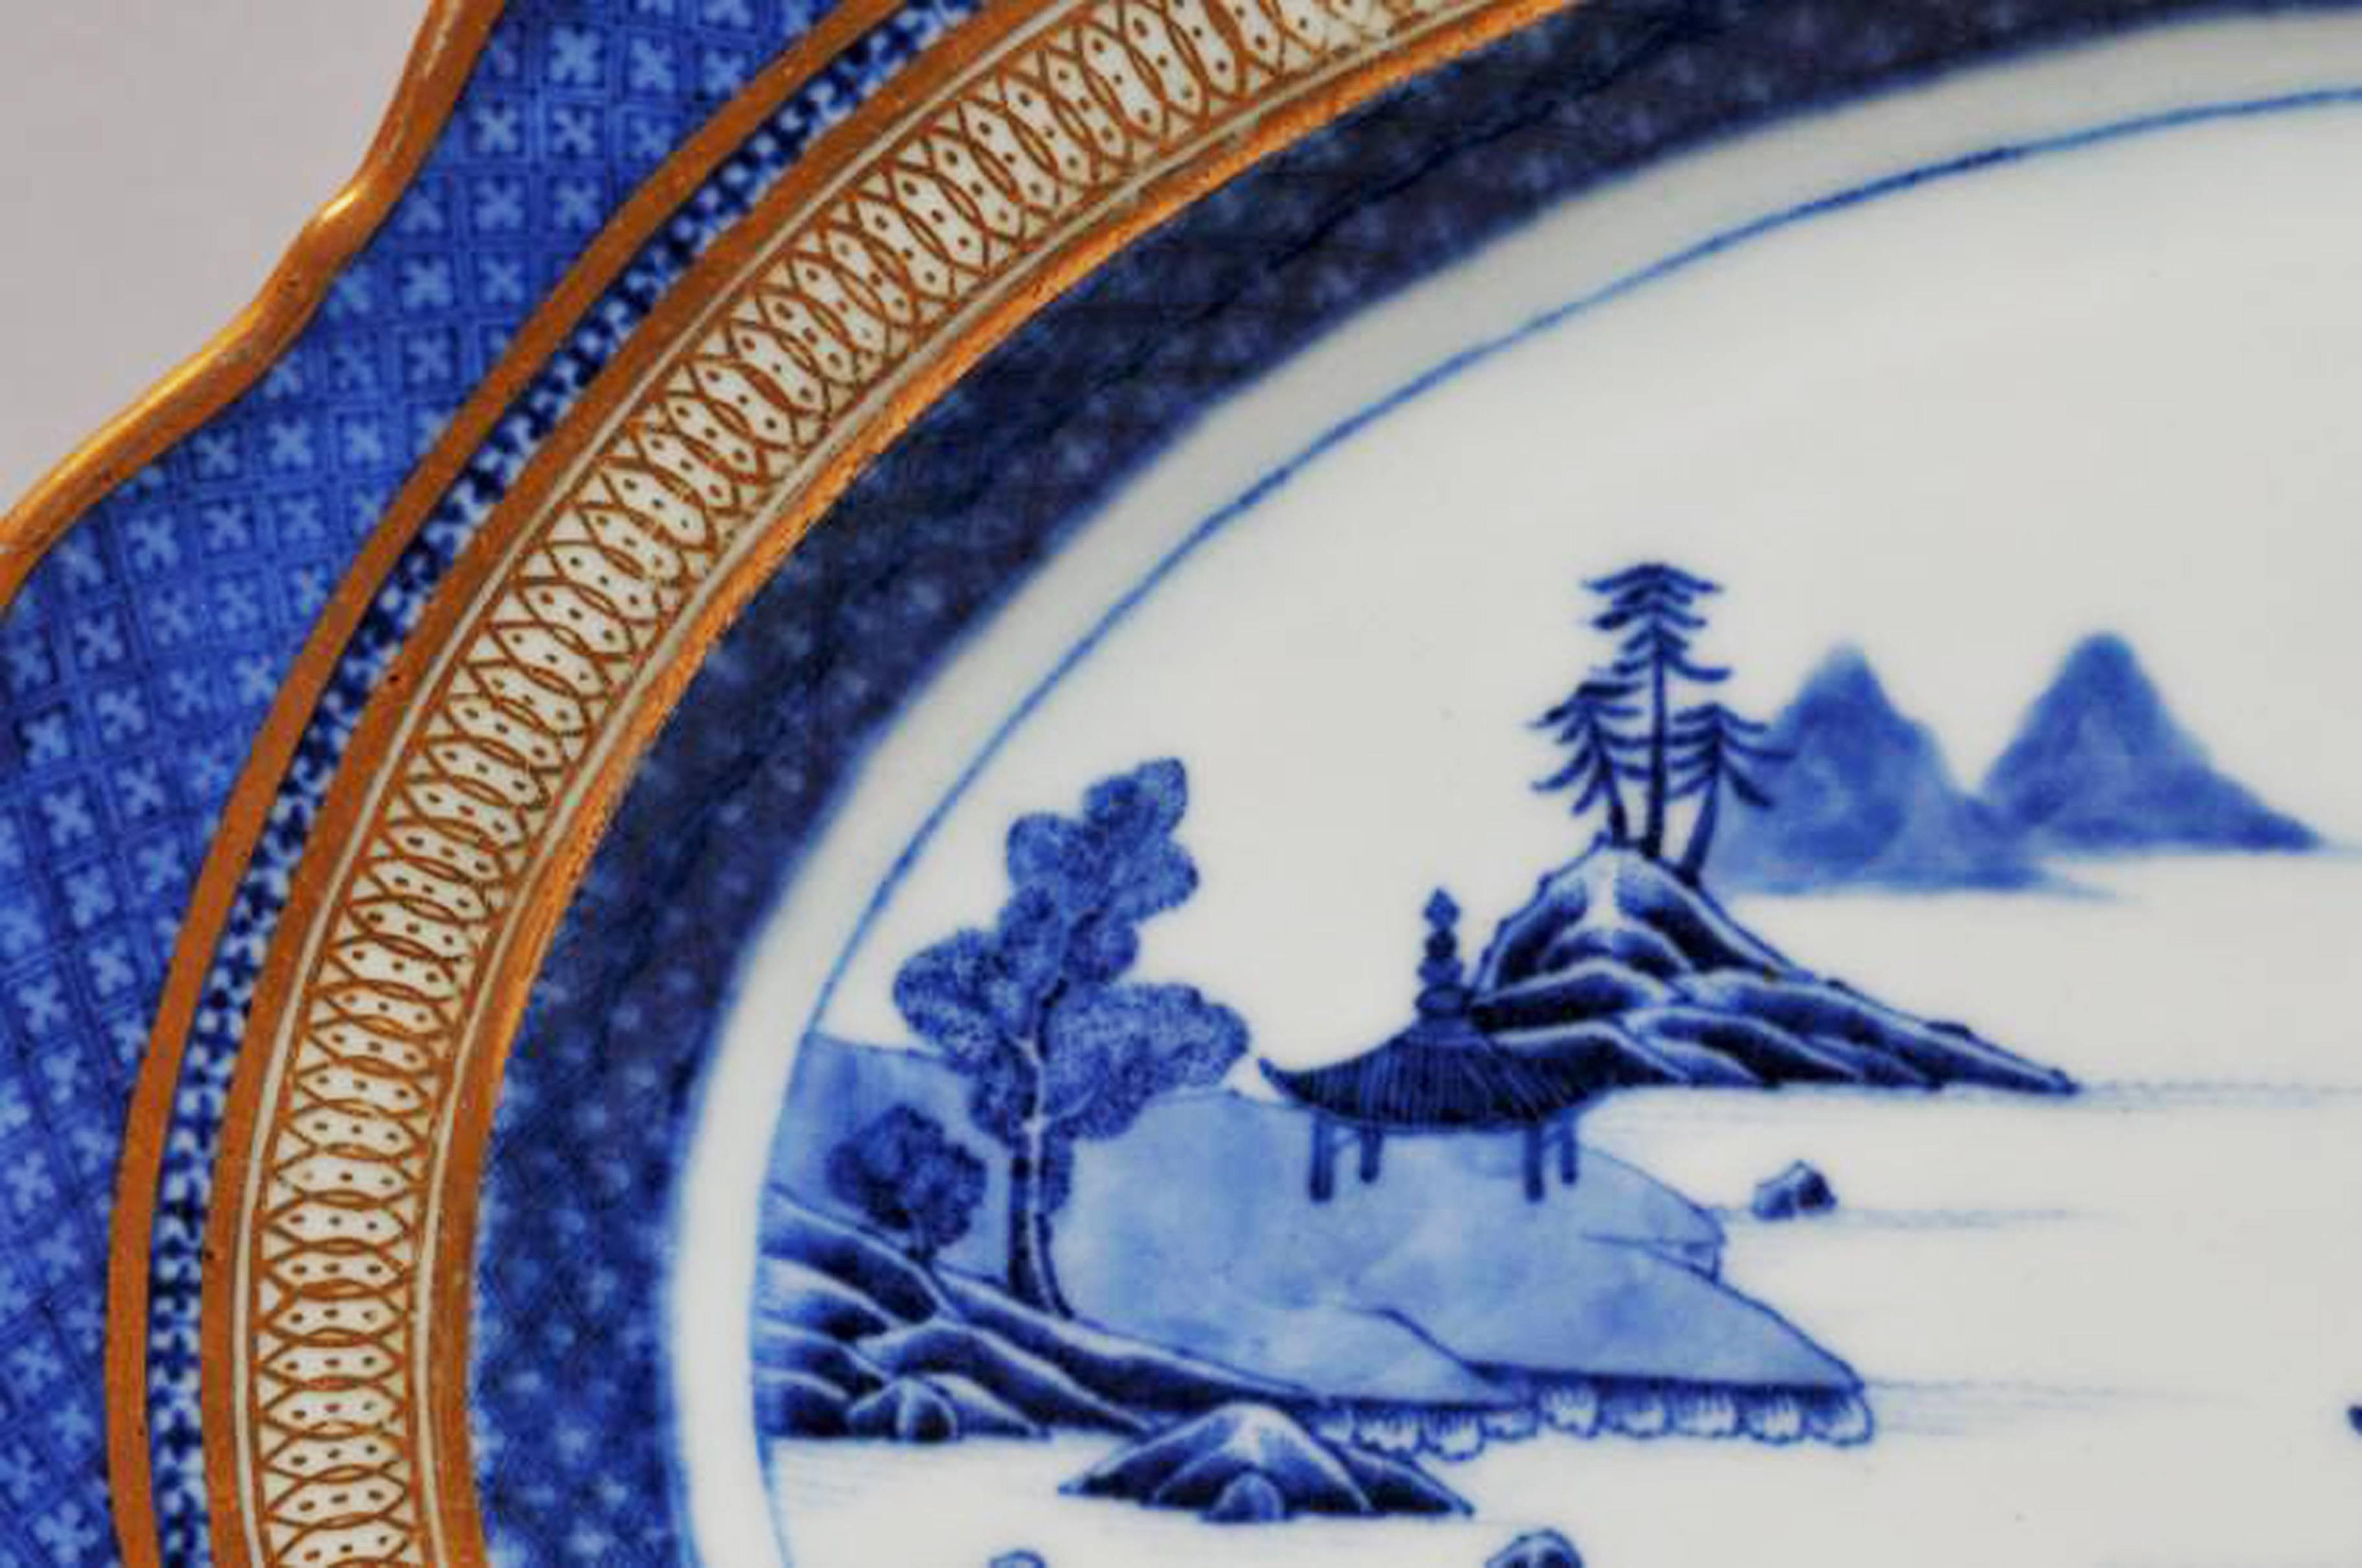 Chinese export porcelain large underglaze blue & white dish with London-decorated gilt border,
circa 1780

A large Chinese Export porcelain scalloped-edged dish with a Hills and Stream pattern with a diaper border and gilt decoration applied in